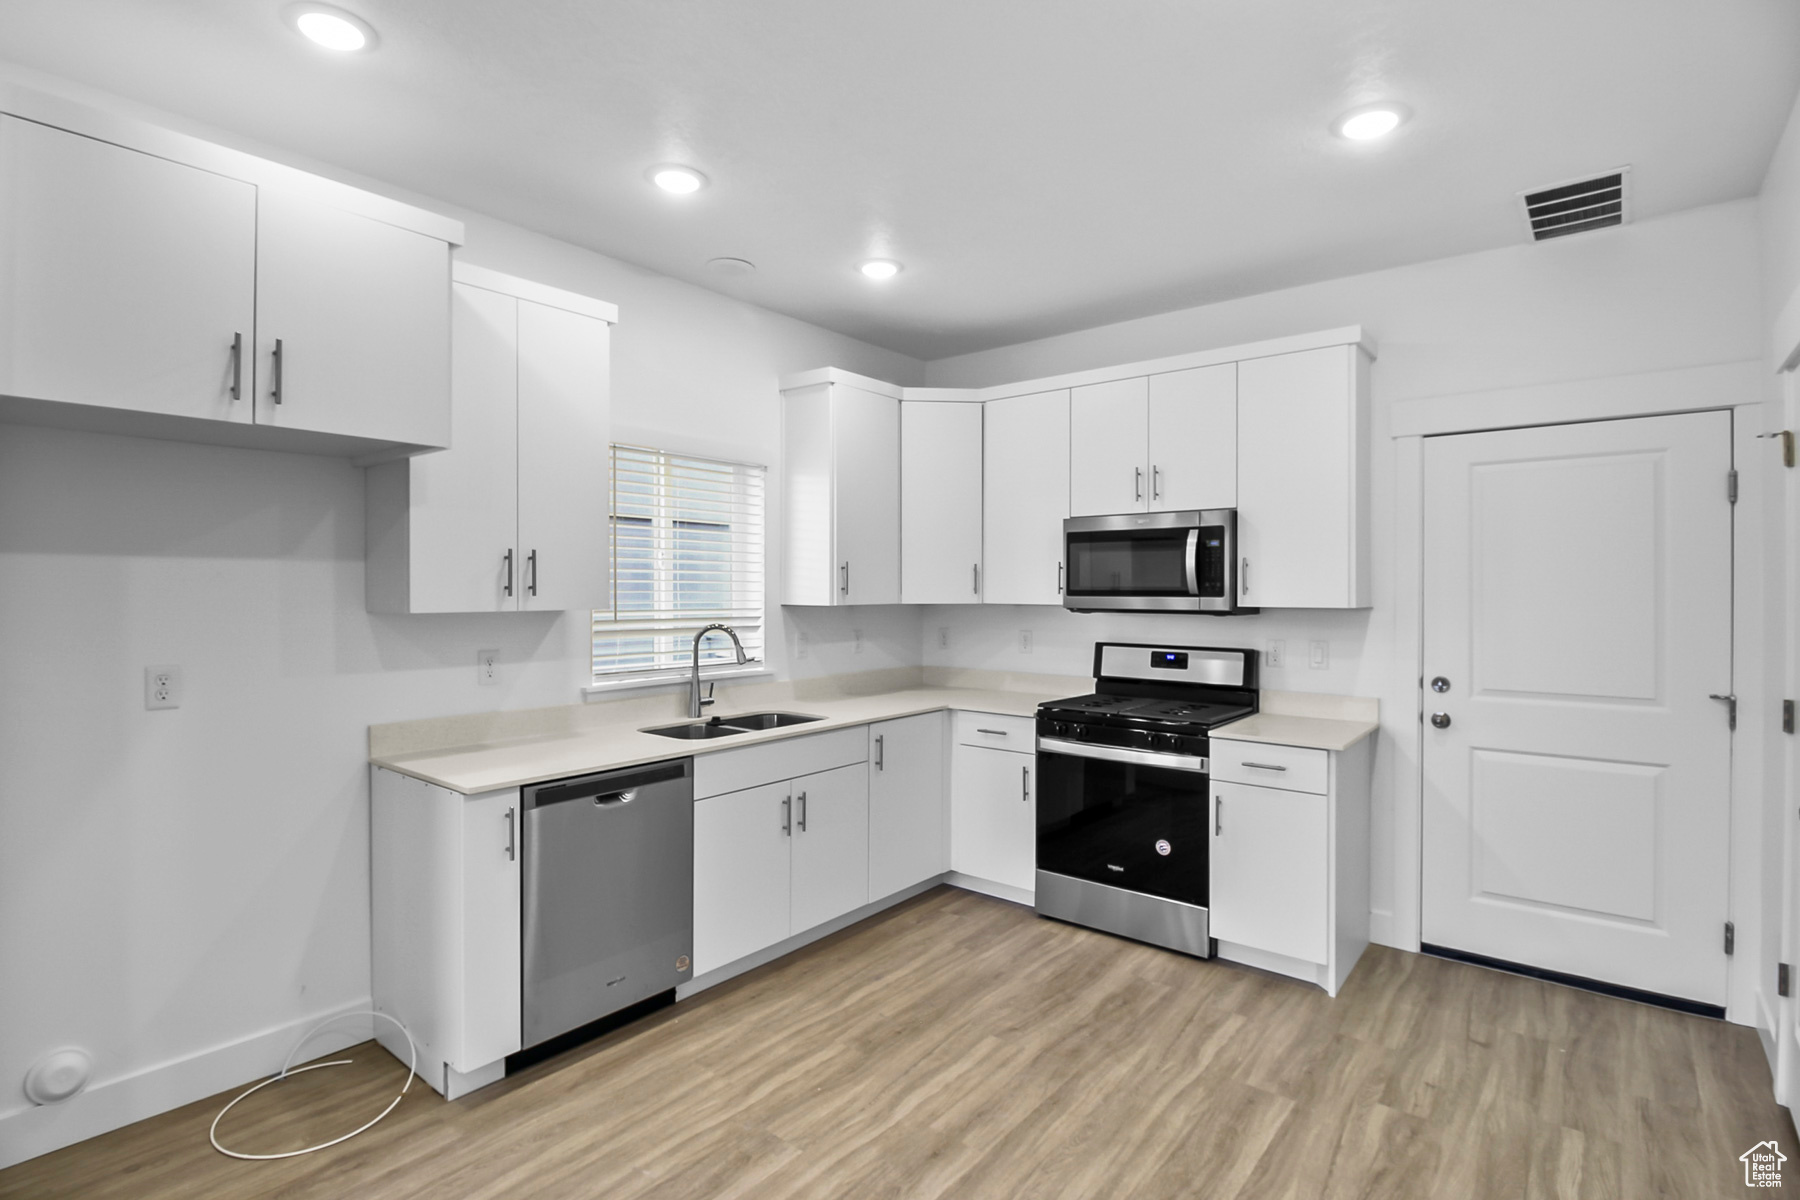 Kitchen with light hardwood / wood-style flooring, white cabinets, appliances with stainless steel finishes, and sink